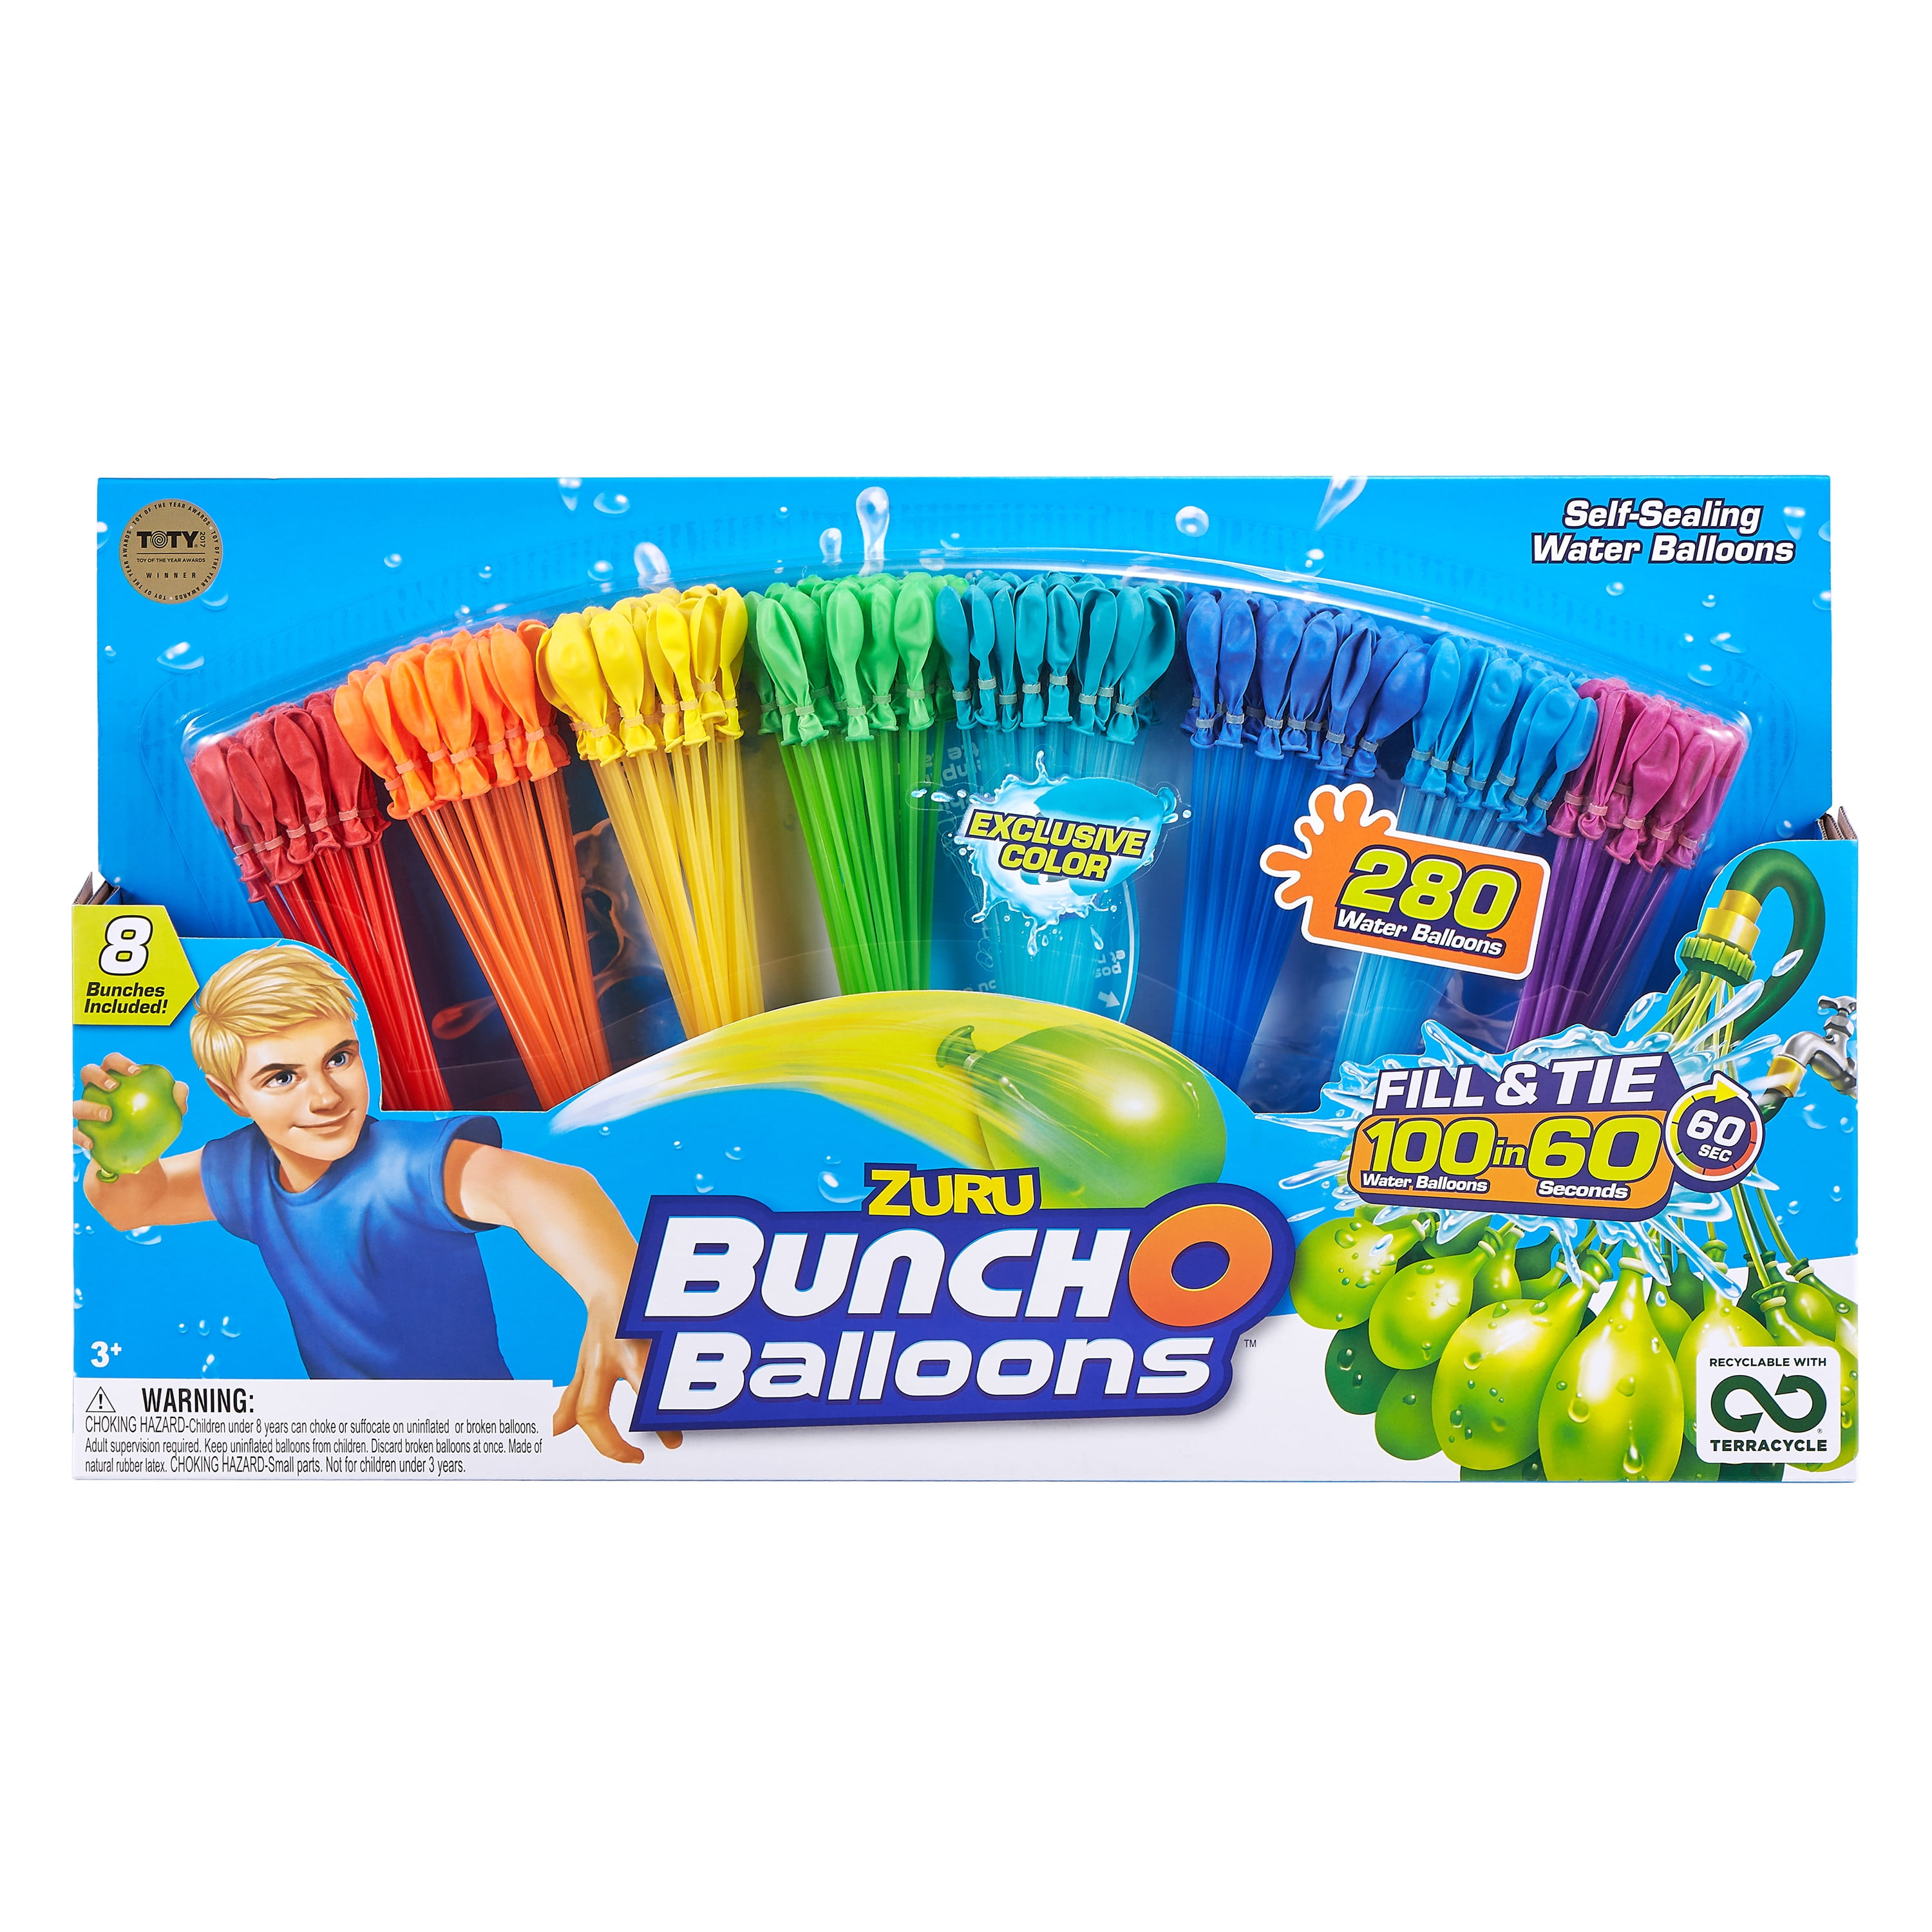 Details about   20Packs 2220pcs Bunch O Balloons Style Self-Sealing Water Balloons,party balloon 